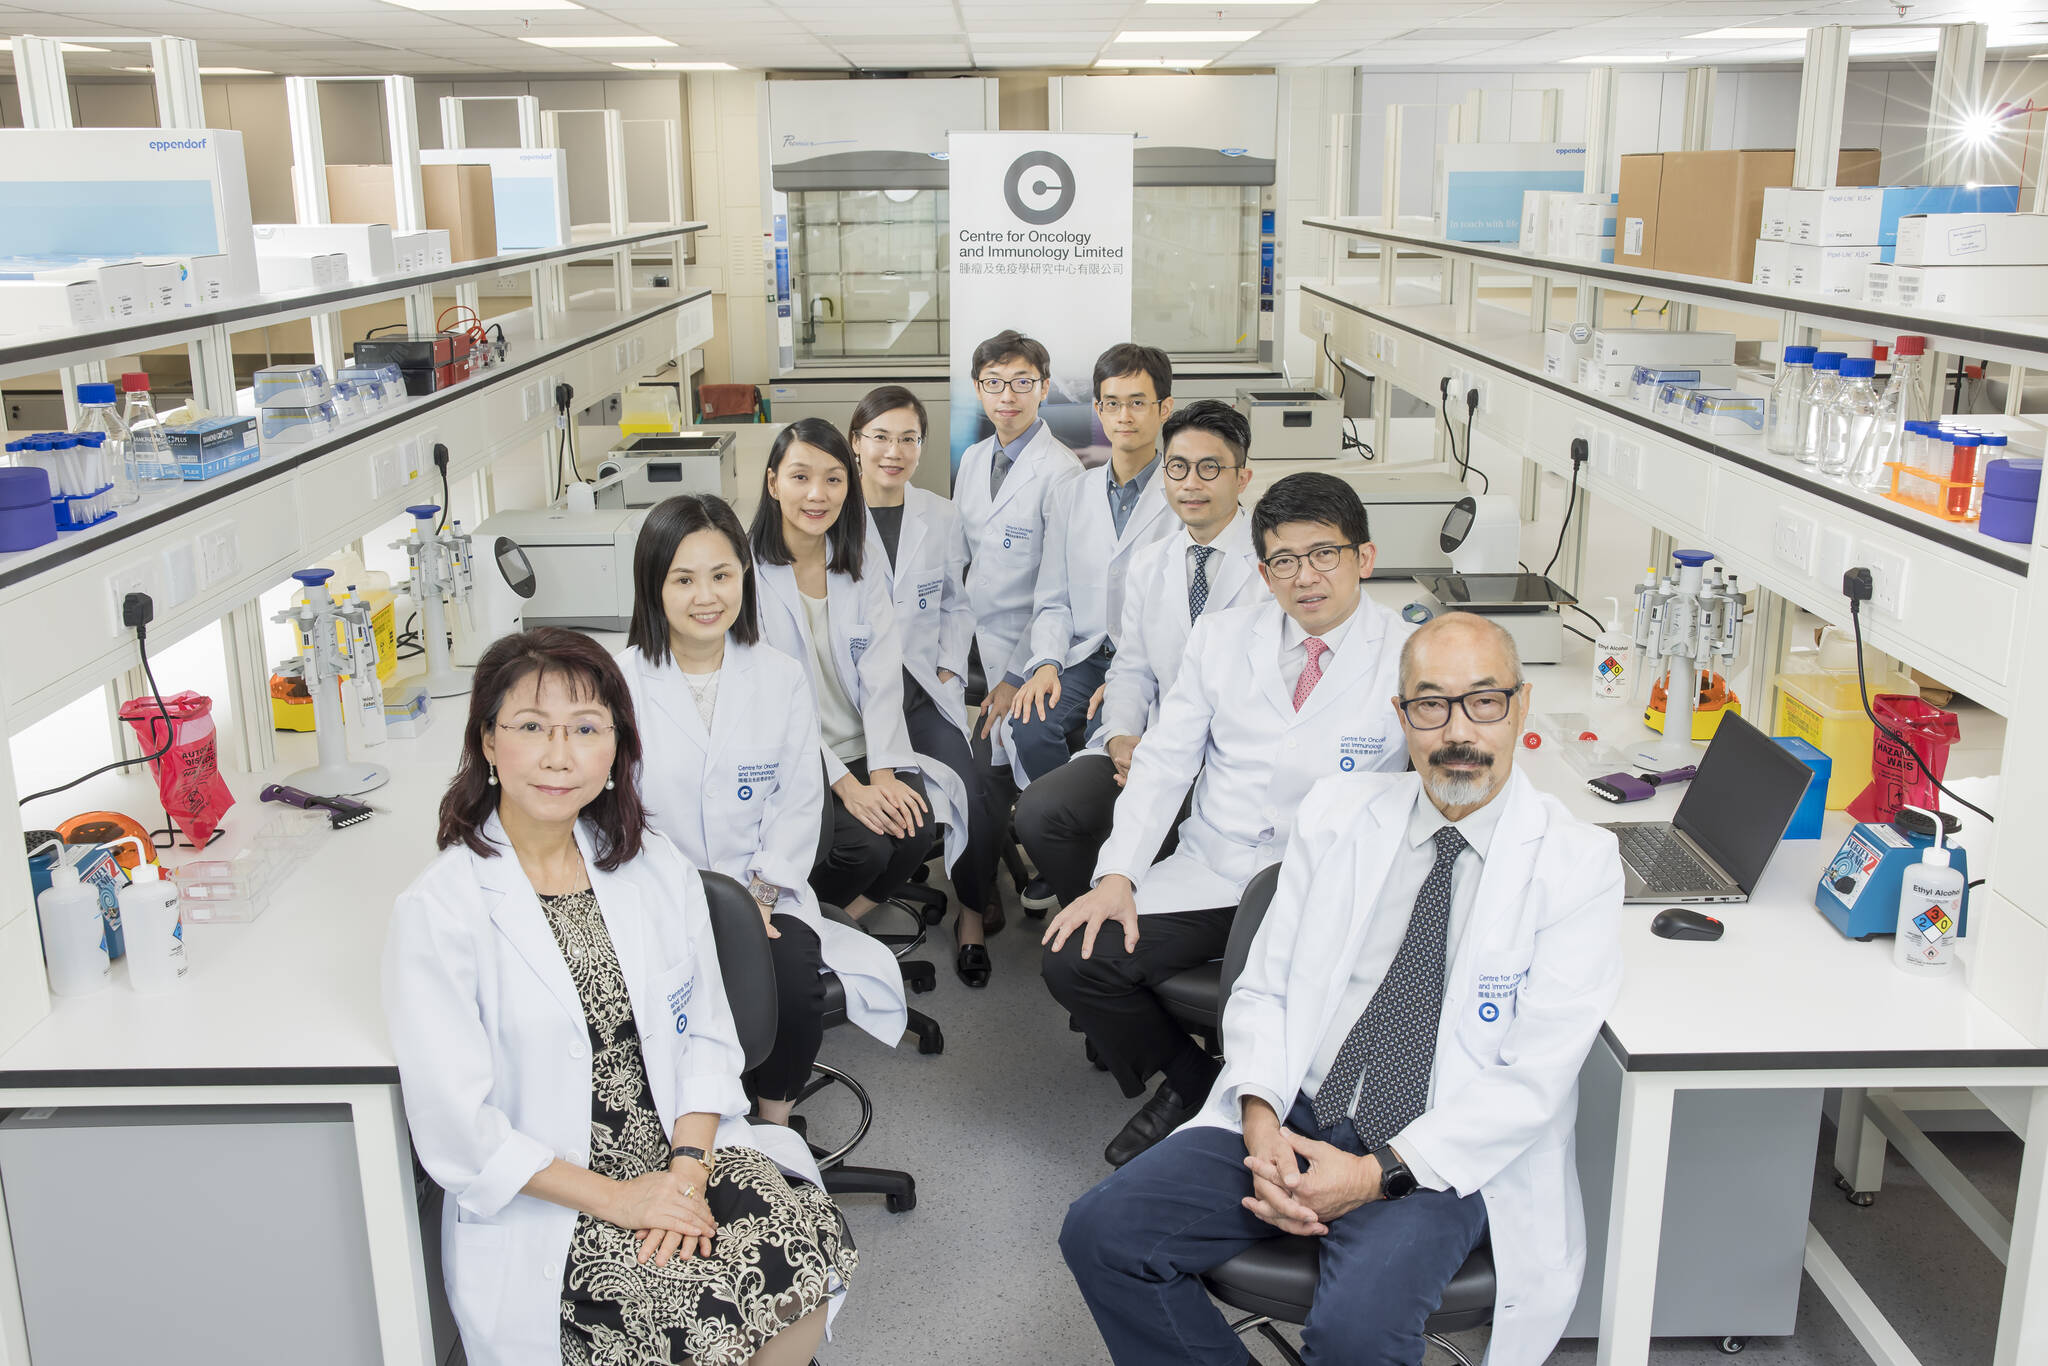 The Centre’ s multidisciplinary research team comprises globally renowned researchers with complementary expertise and experience in translational research and commercialisation.